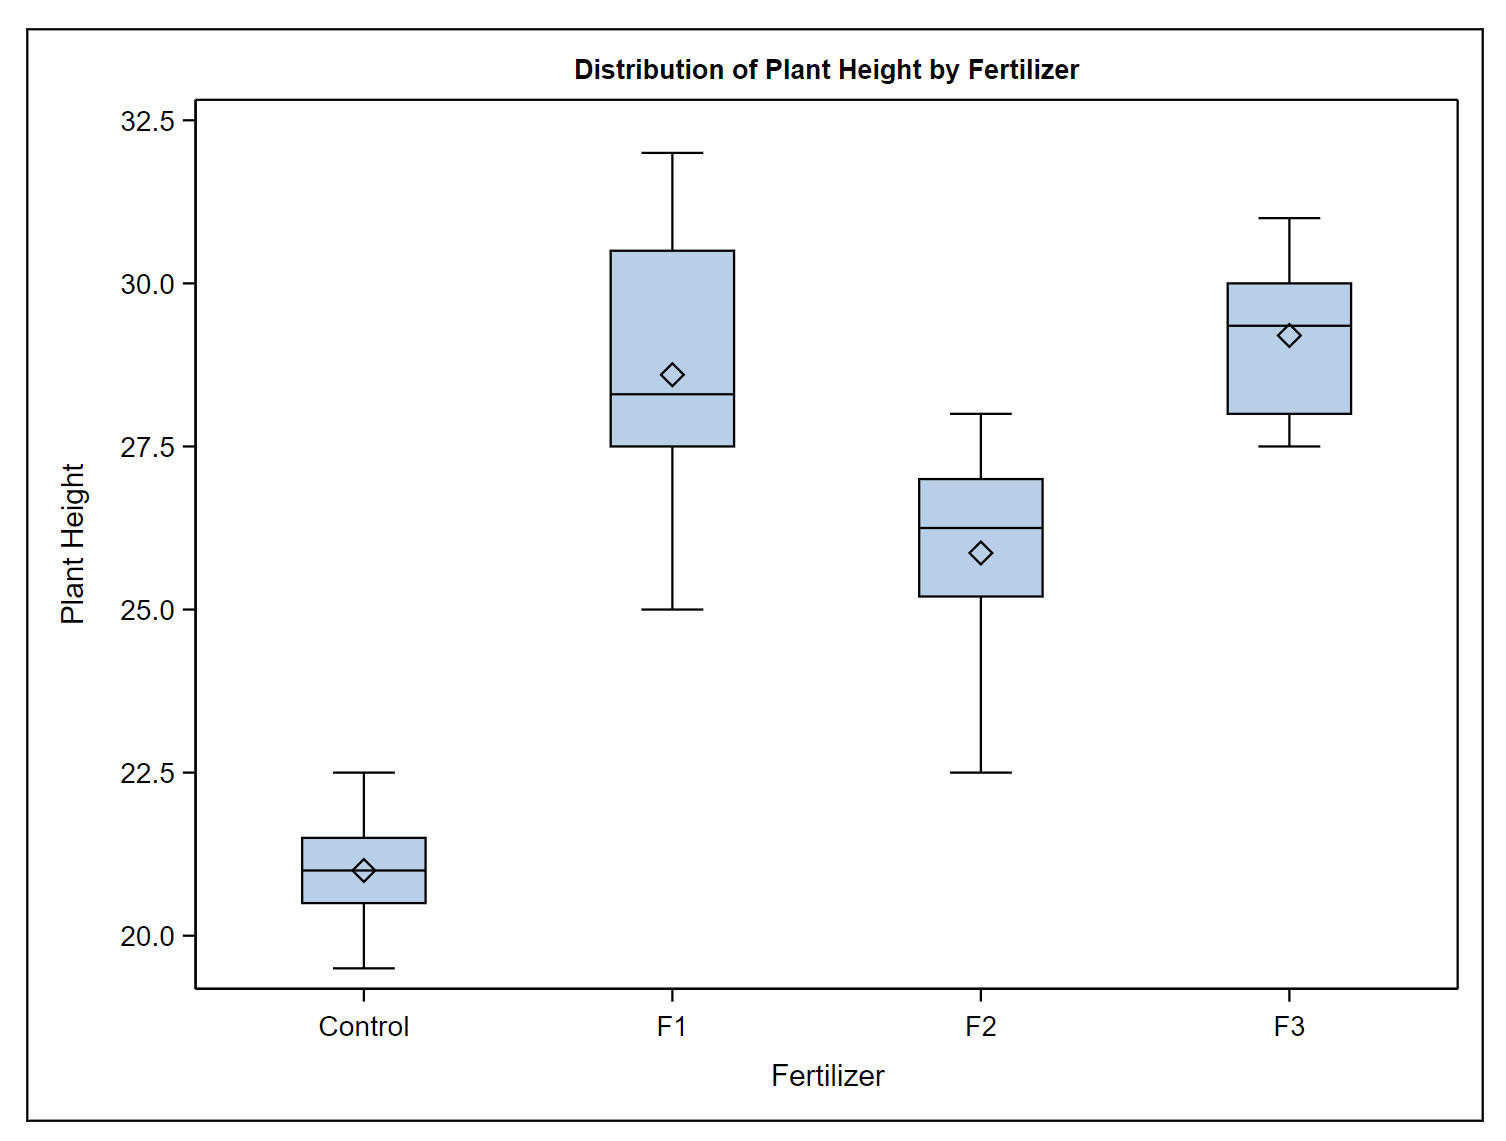 Box plot showing the distribution of plant height, separated by fertilizer treatment.